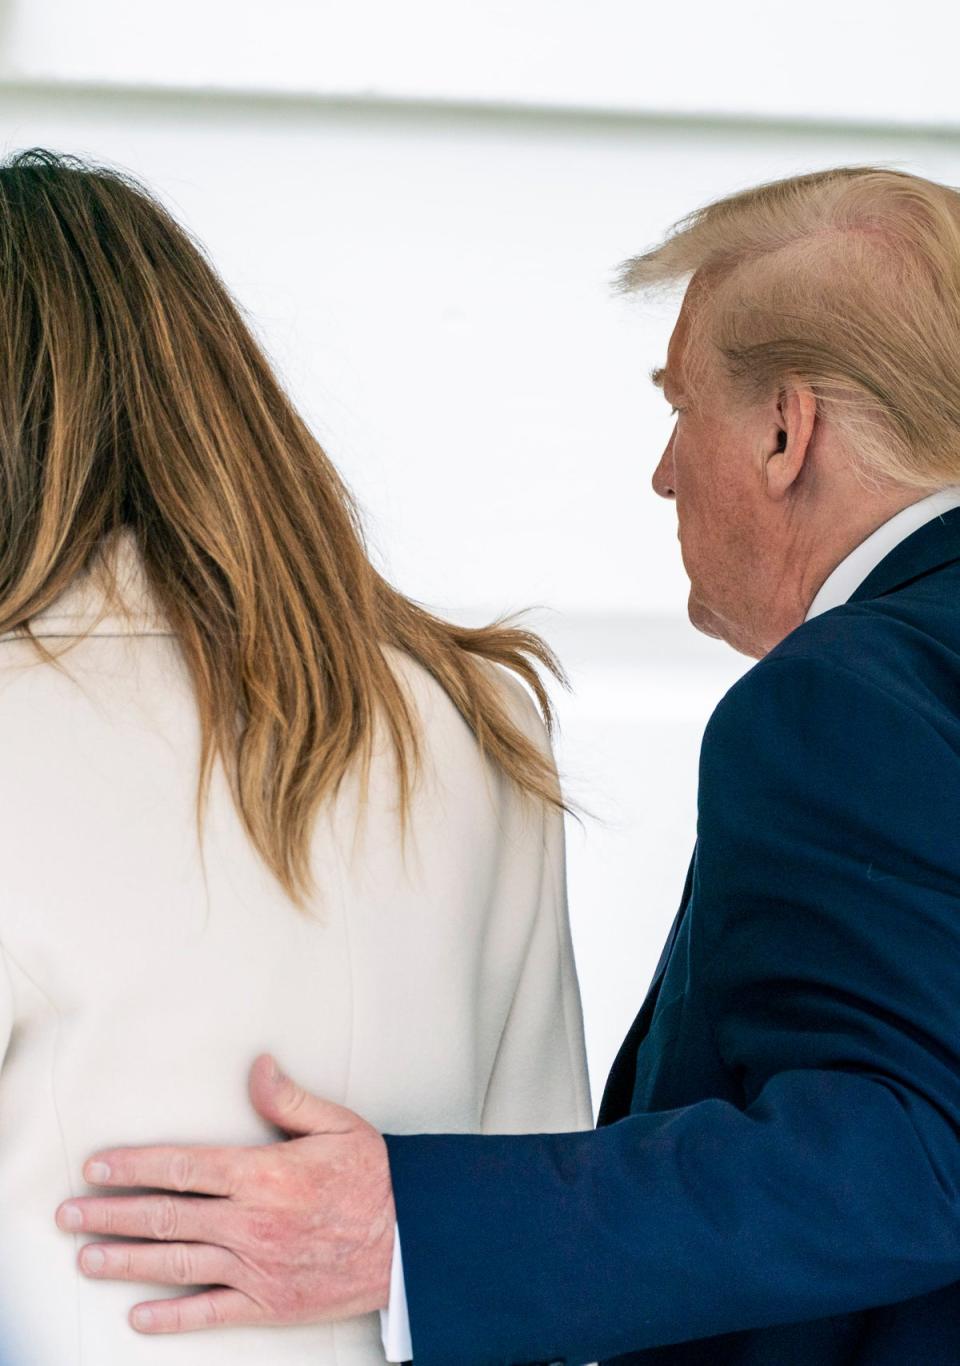 Then-US president Donald Trump and first lady Melania Trump arrive to the White House after a trip to Baltimore, Maryland, on 25 May 2020 (Getty)